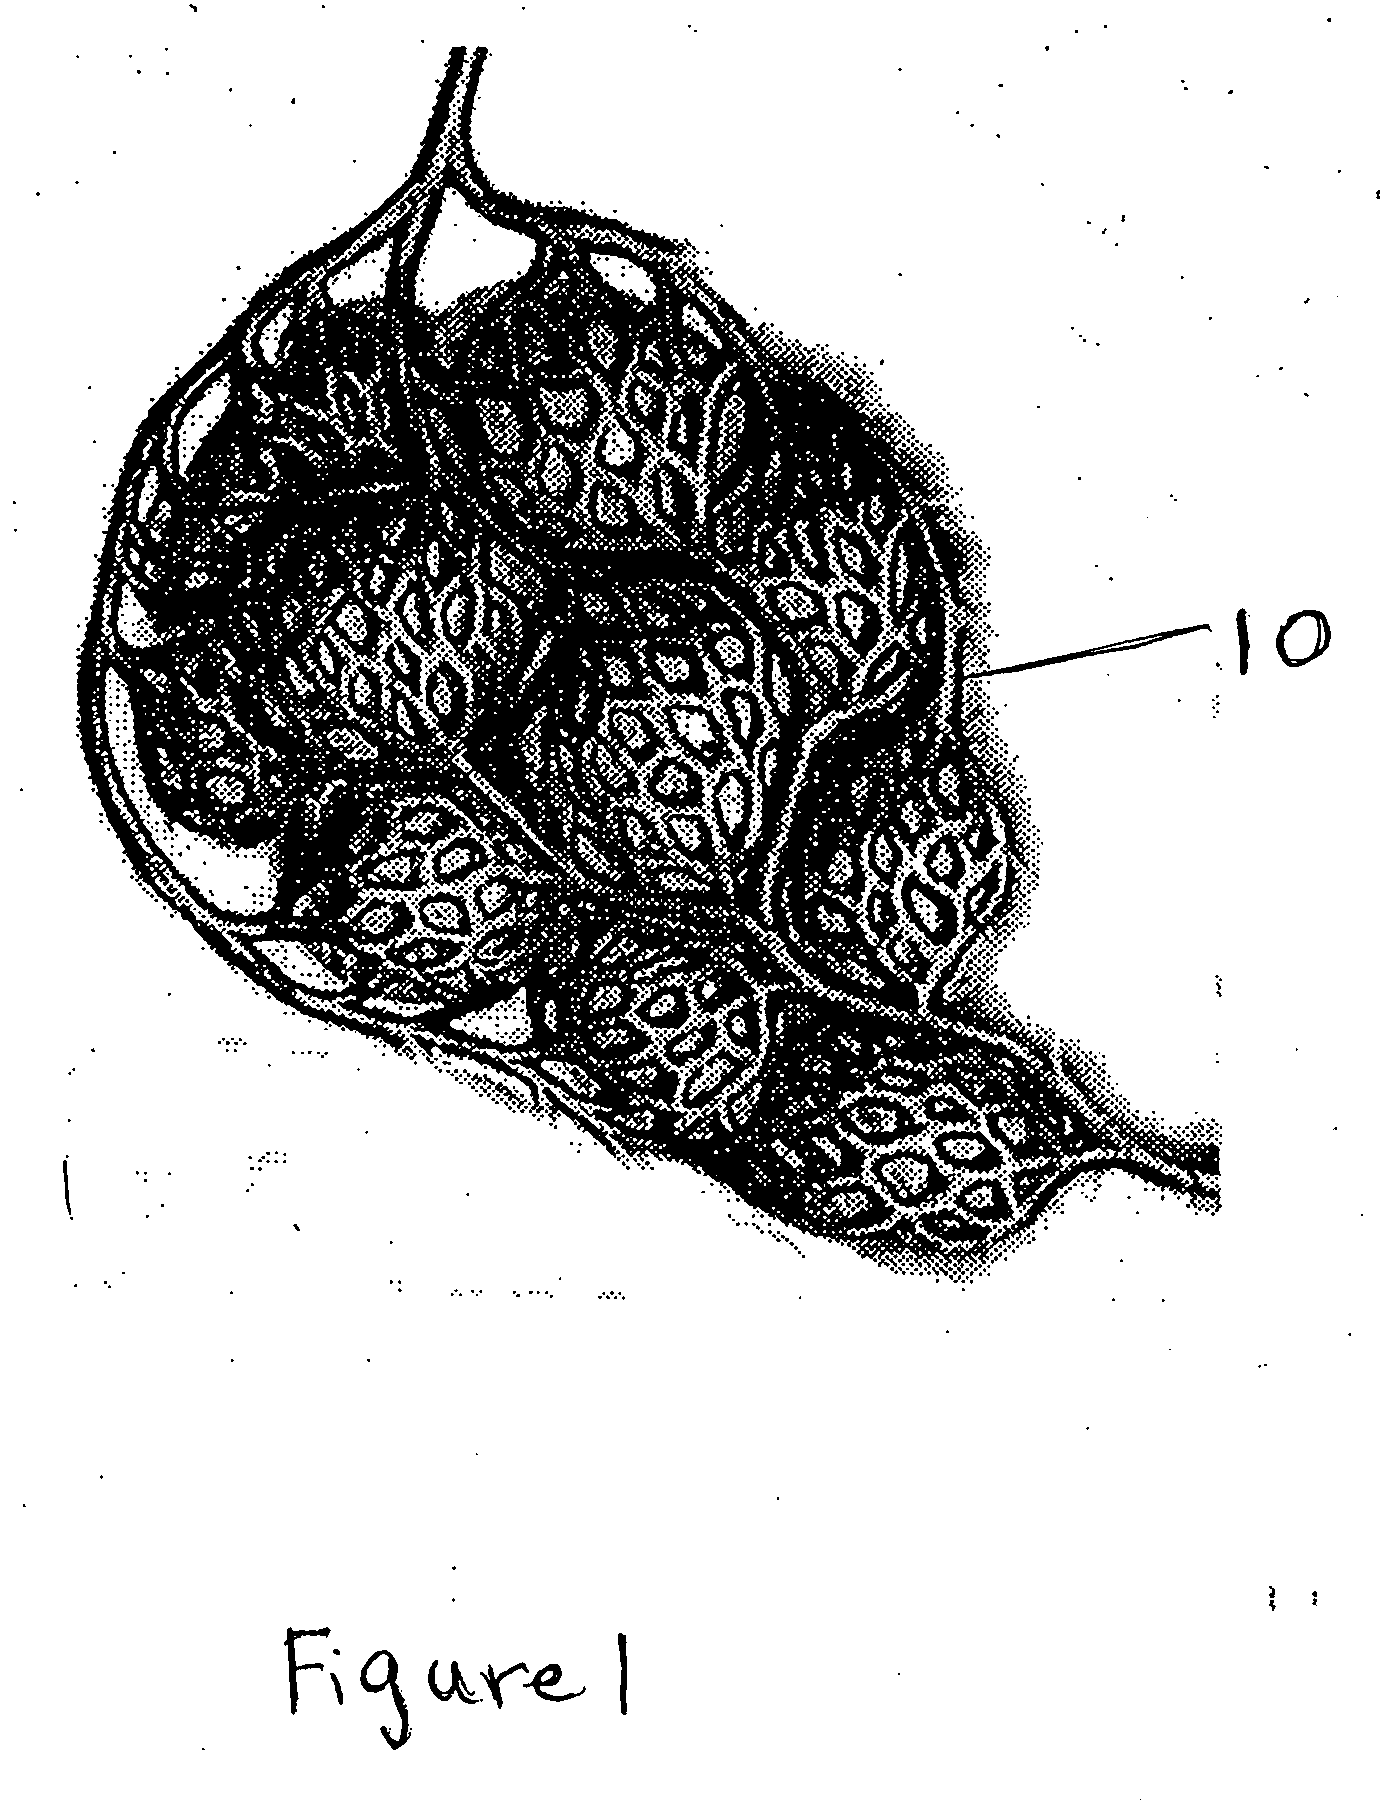 Particle/cell separation device and compositions